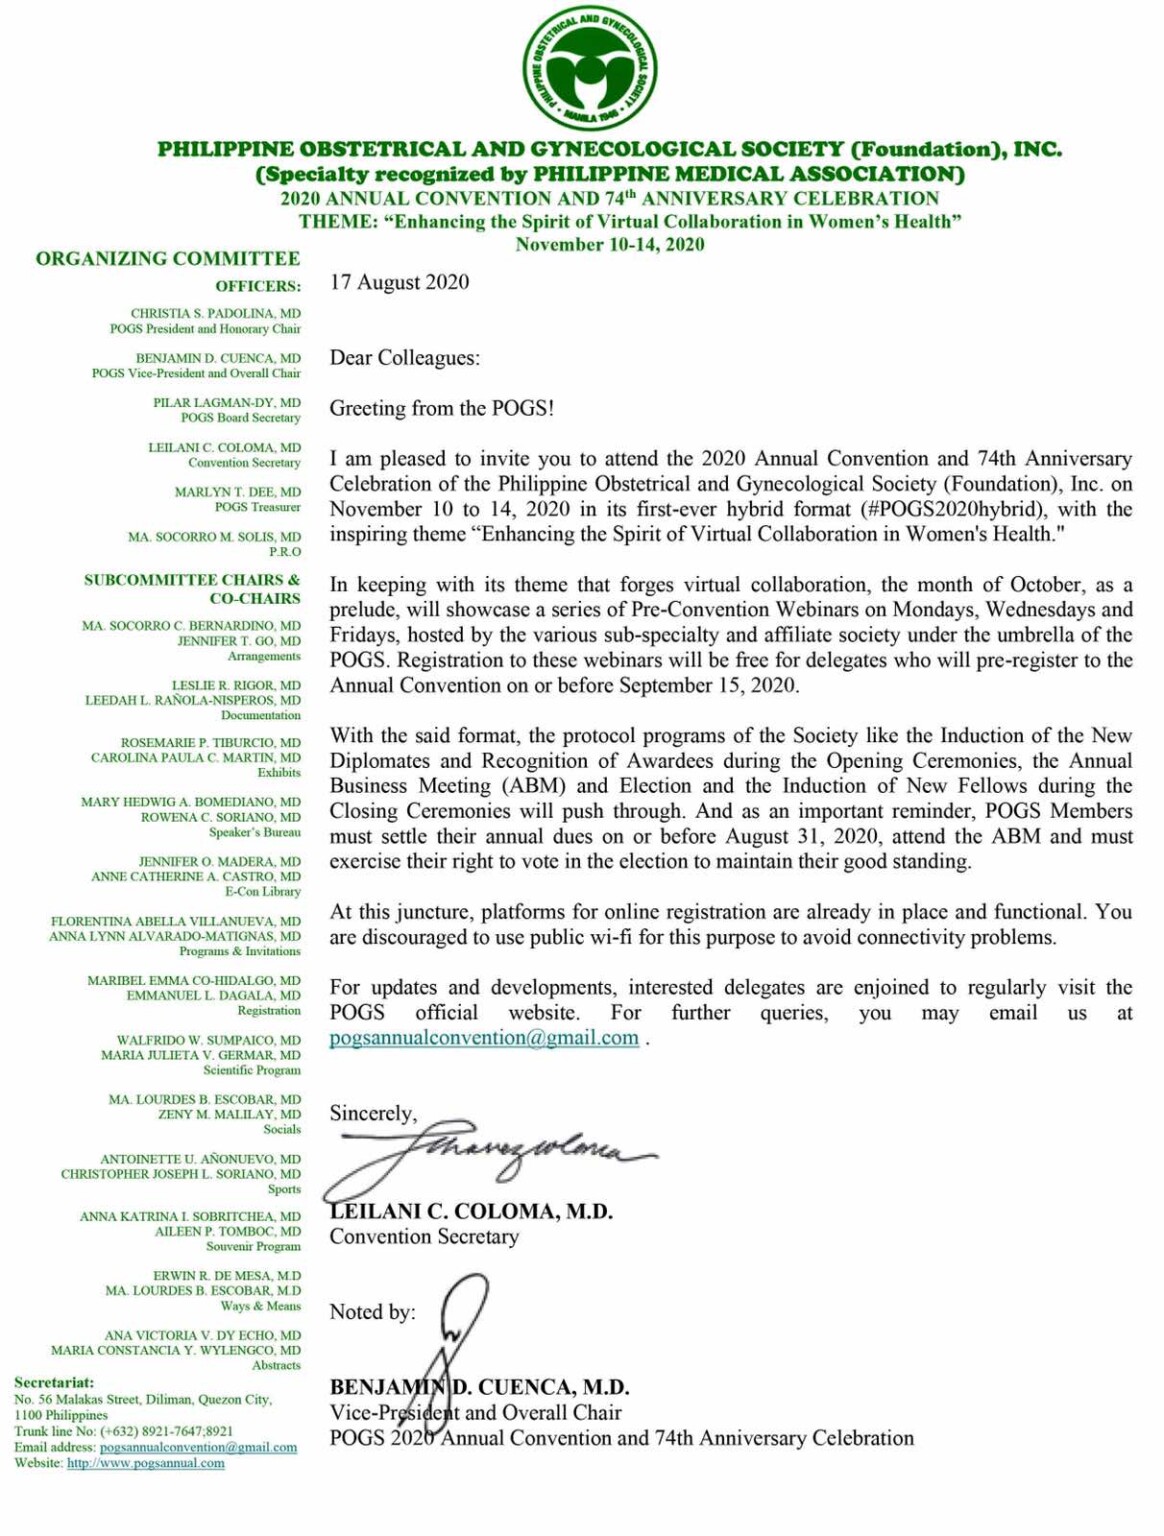 Letter of Invitation to POGS 2020 Annual Convention and 74th